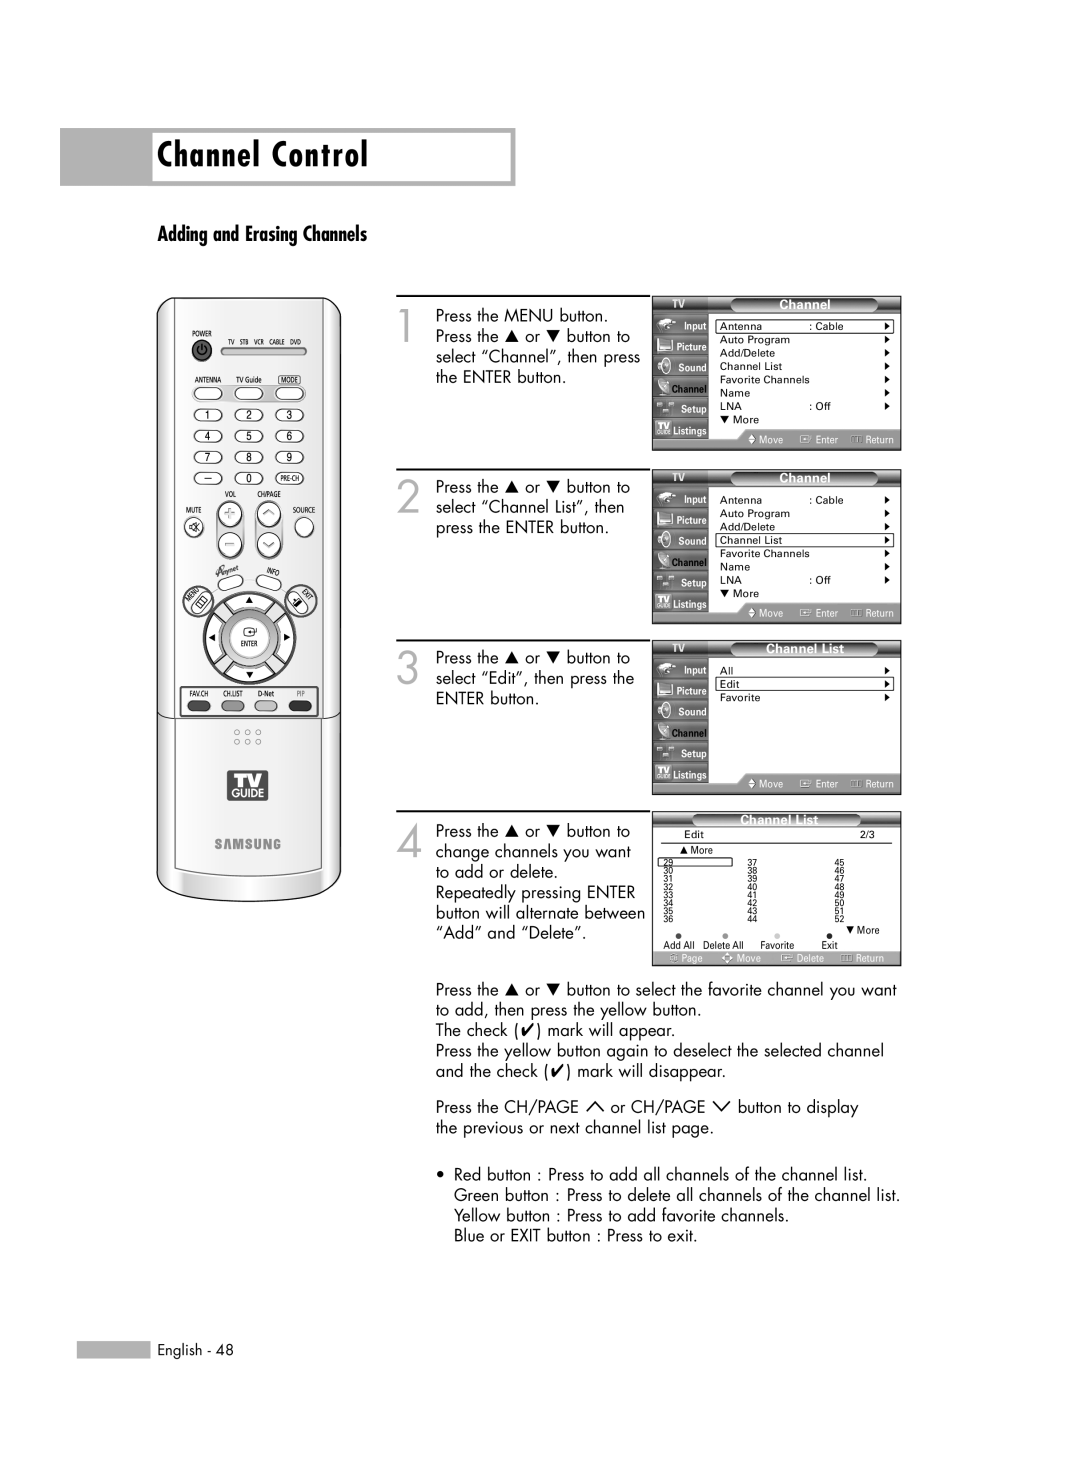 Samsung HL-R5688W manual Adding and Erasing Channels, Channel Control, More 